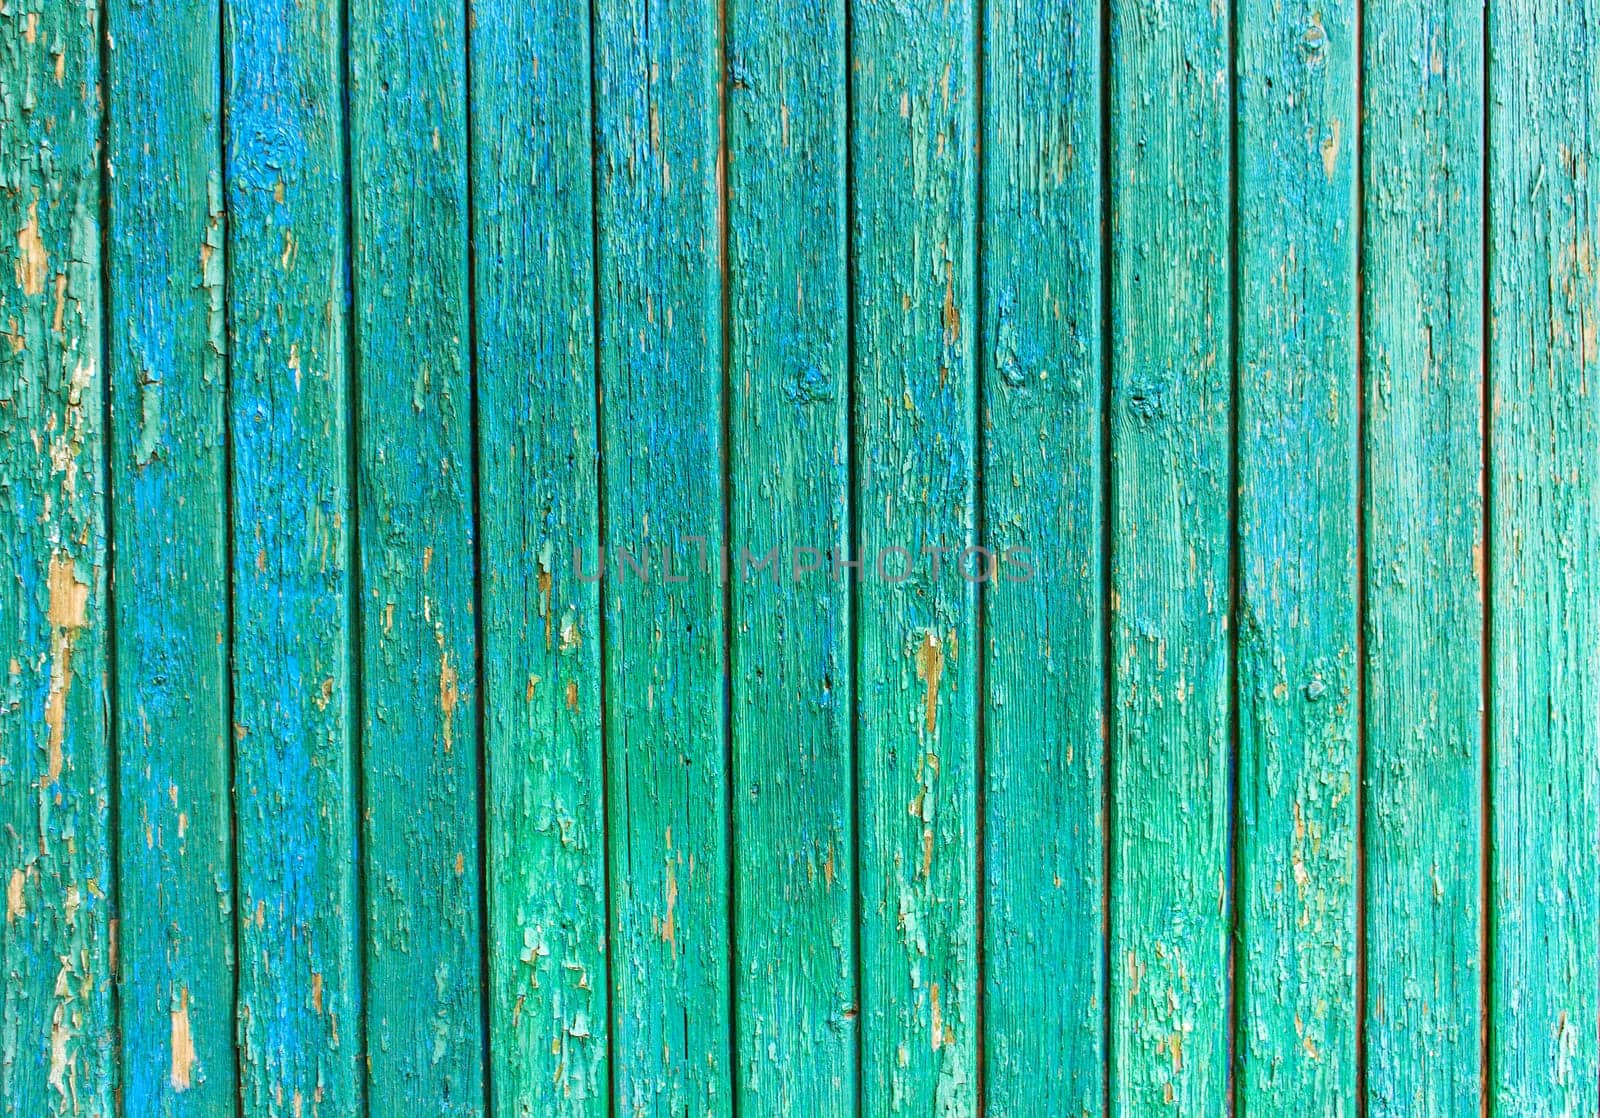 Bright green wooden background with peeling paint and vertical boards by Snegok1967